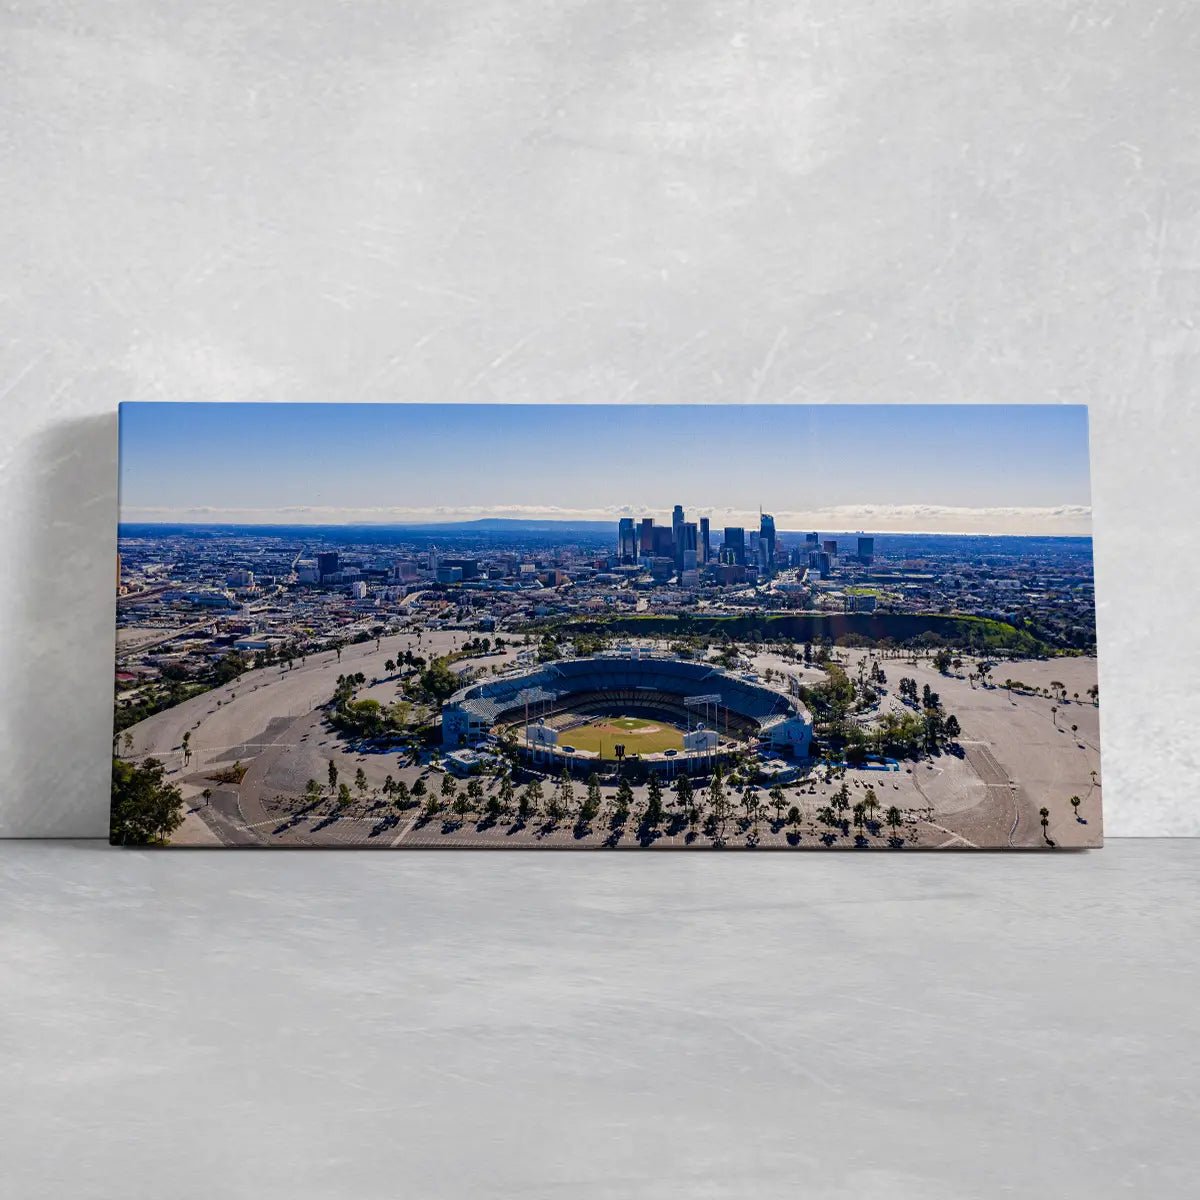  Los Angeles, California - The Famous Dodger Stadium with  Downtown LA in the Background Pictures for Living Room 5 Piece Canvas Wall  Art Modern Artwork Home Decor Stretched Ready to Hang 